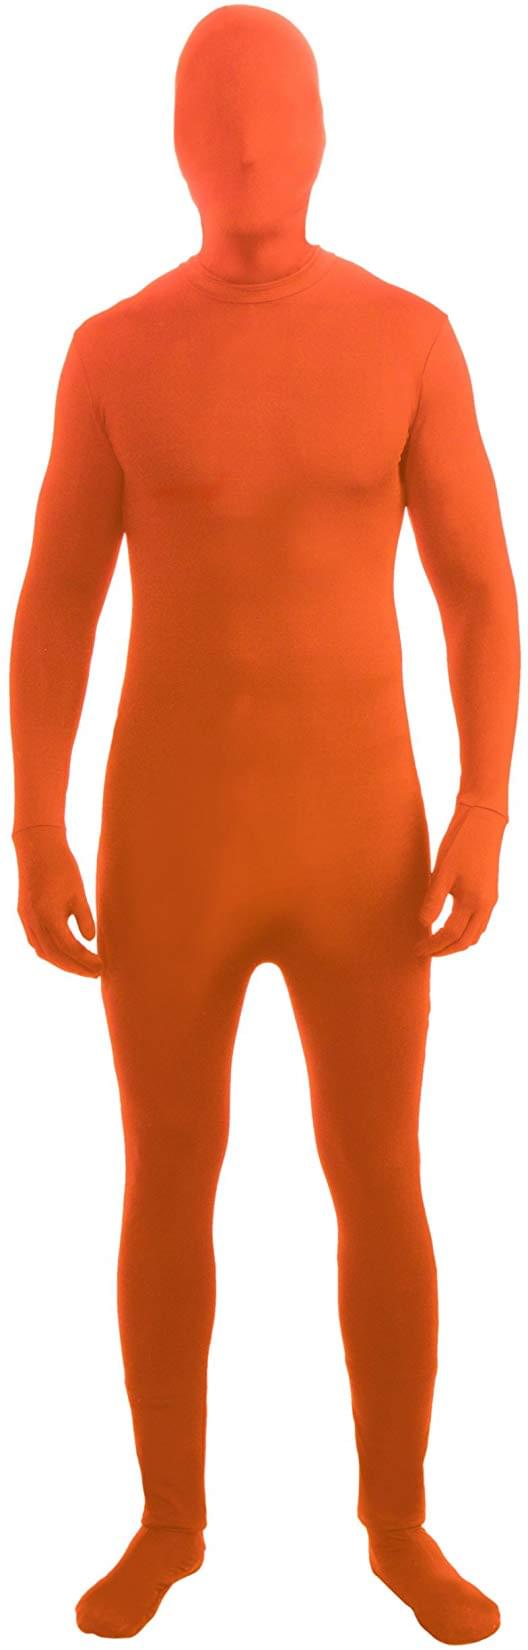 Disappearing Man Neon Orange Body Suit Adult Costume